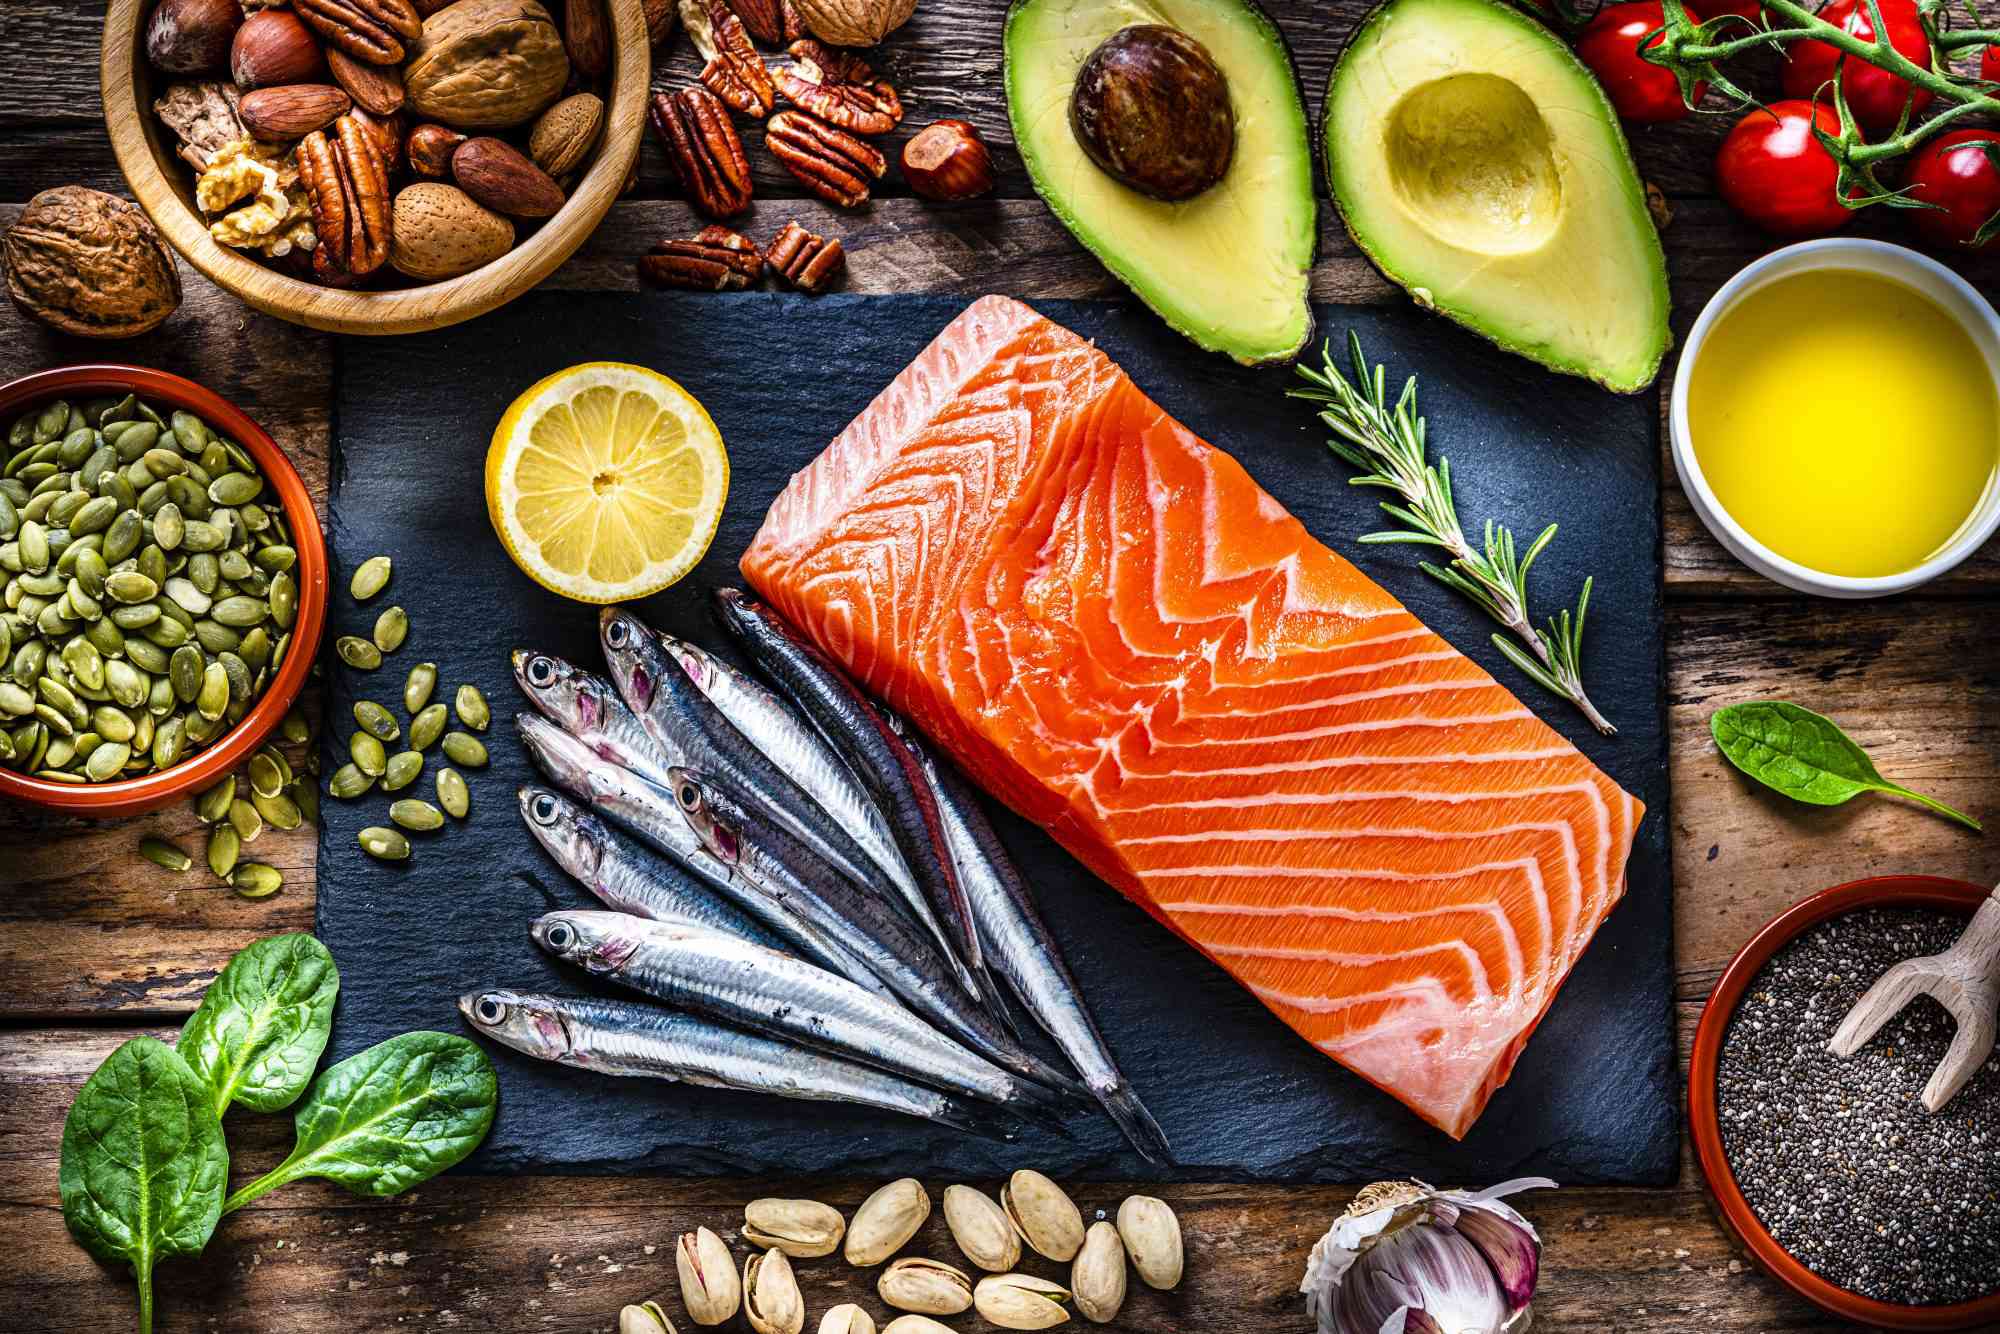 Foods High In Good Fat: Learn The How & Why Of Choosing Fats